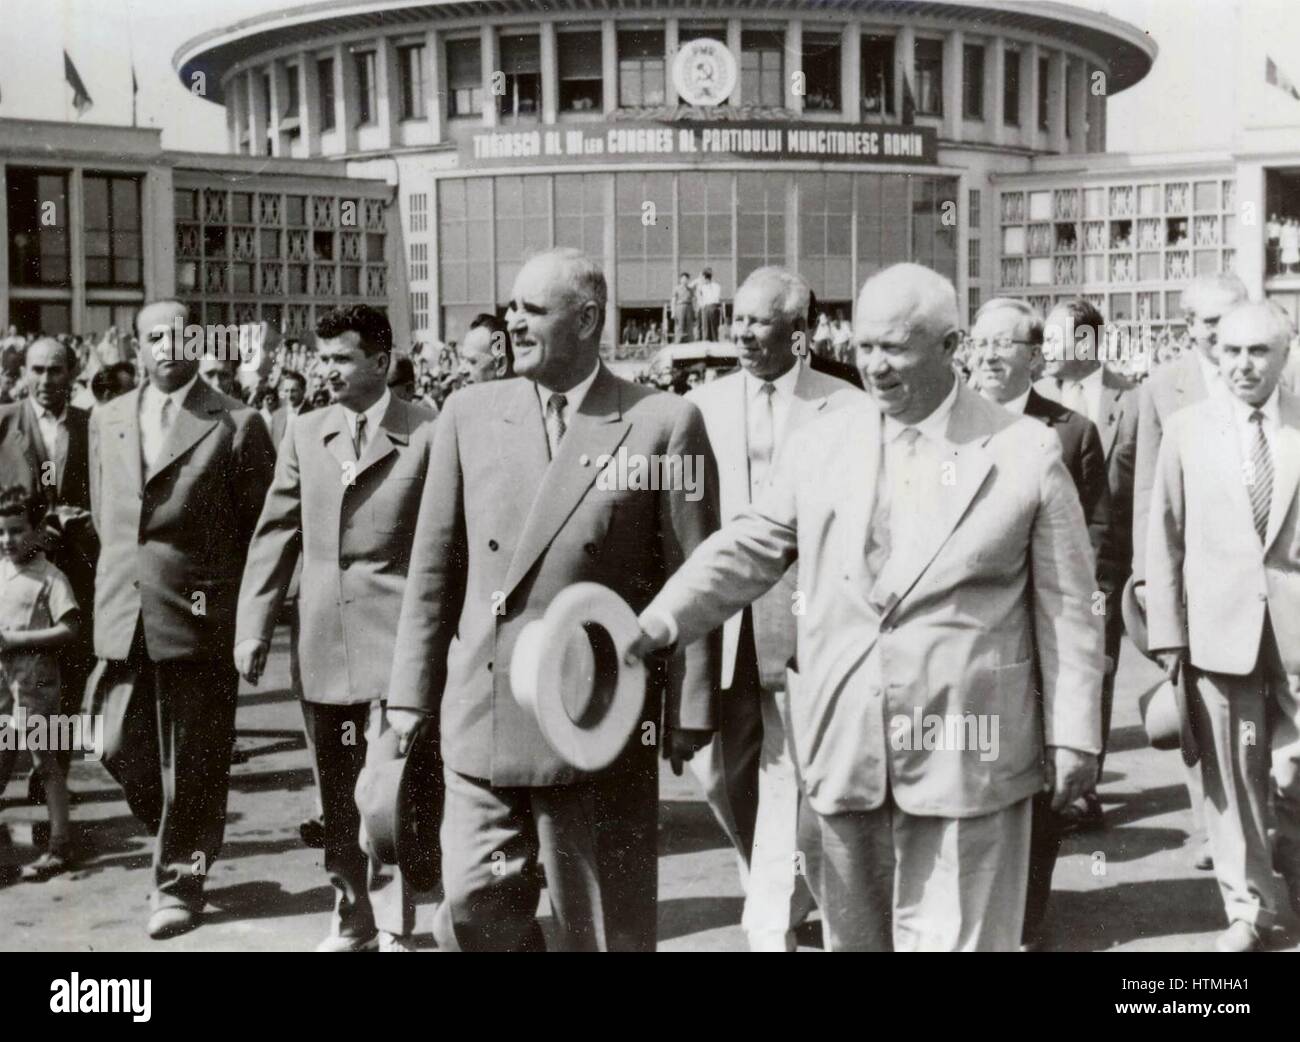 Romanian communist leader Gheorghe Gheorghiu-Dej (front row, left) seeing off Soviet leader Nikita Khrushchev (front row, right) upon the close of the Romanian Communist Party's 7th Congress 1959 at Bucharest's Baneasa Airport. The image also shows Gheorg Stock Photo